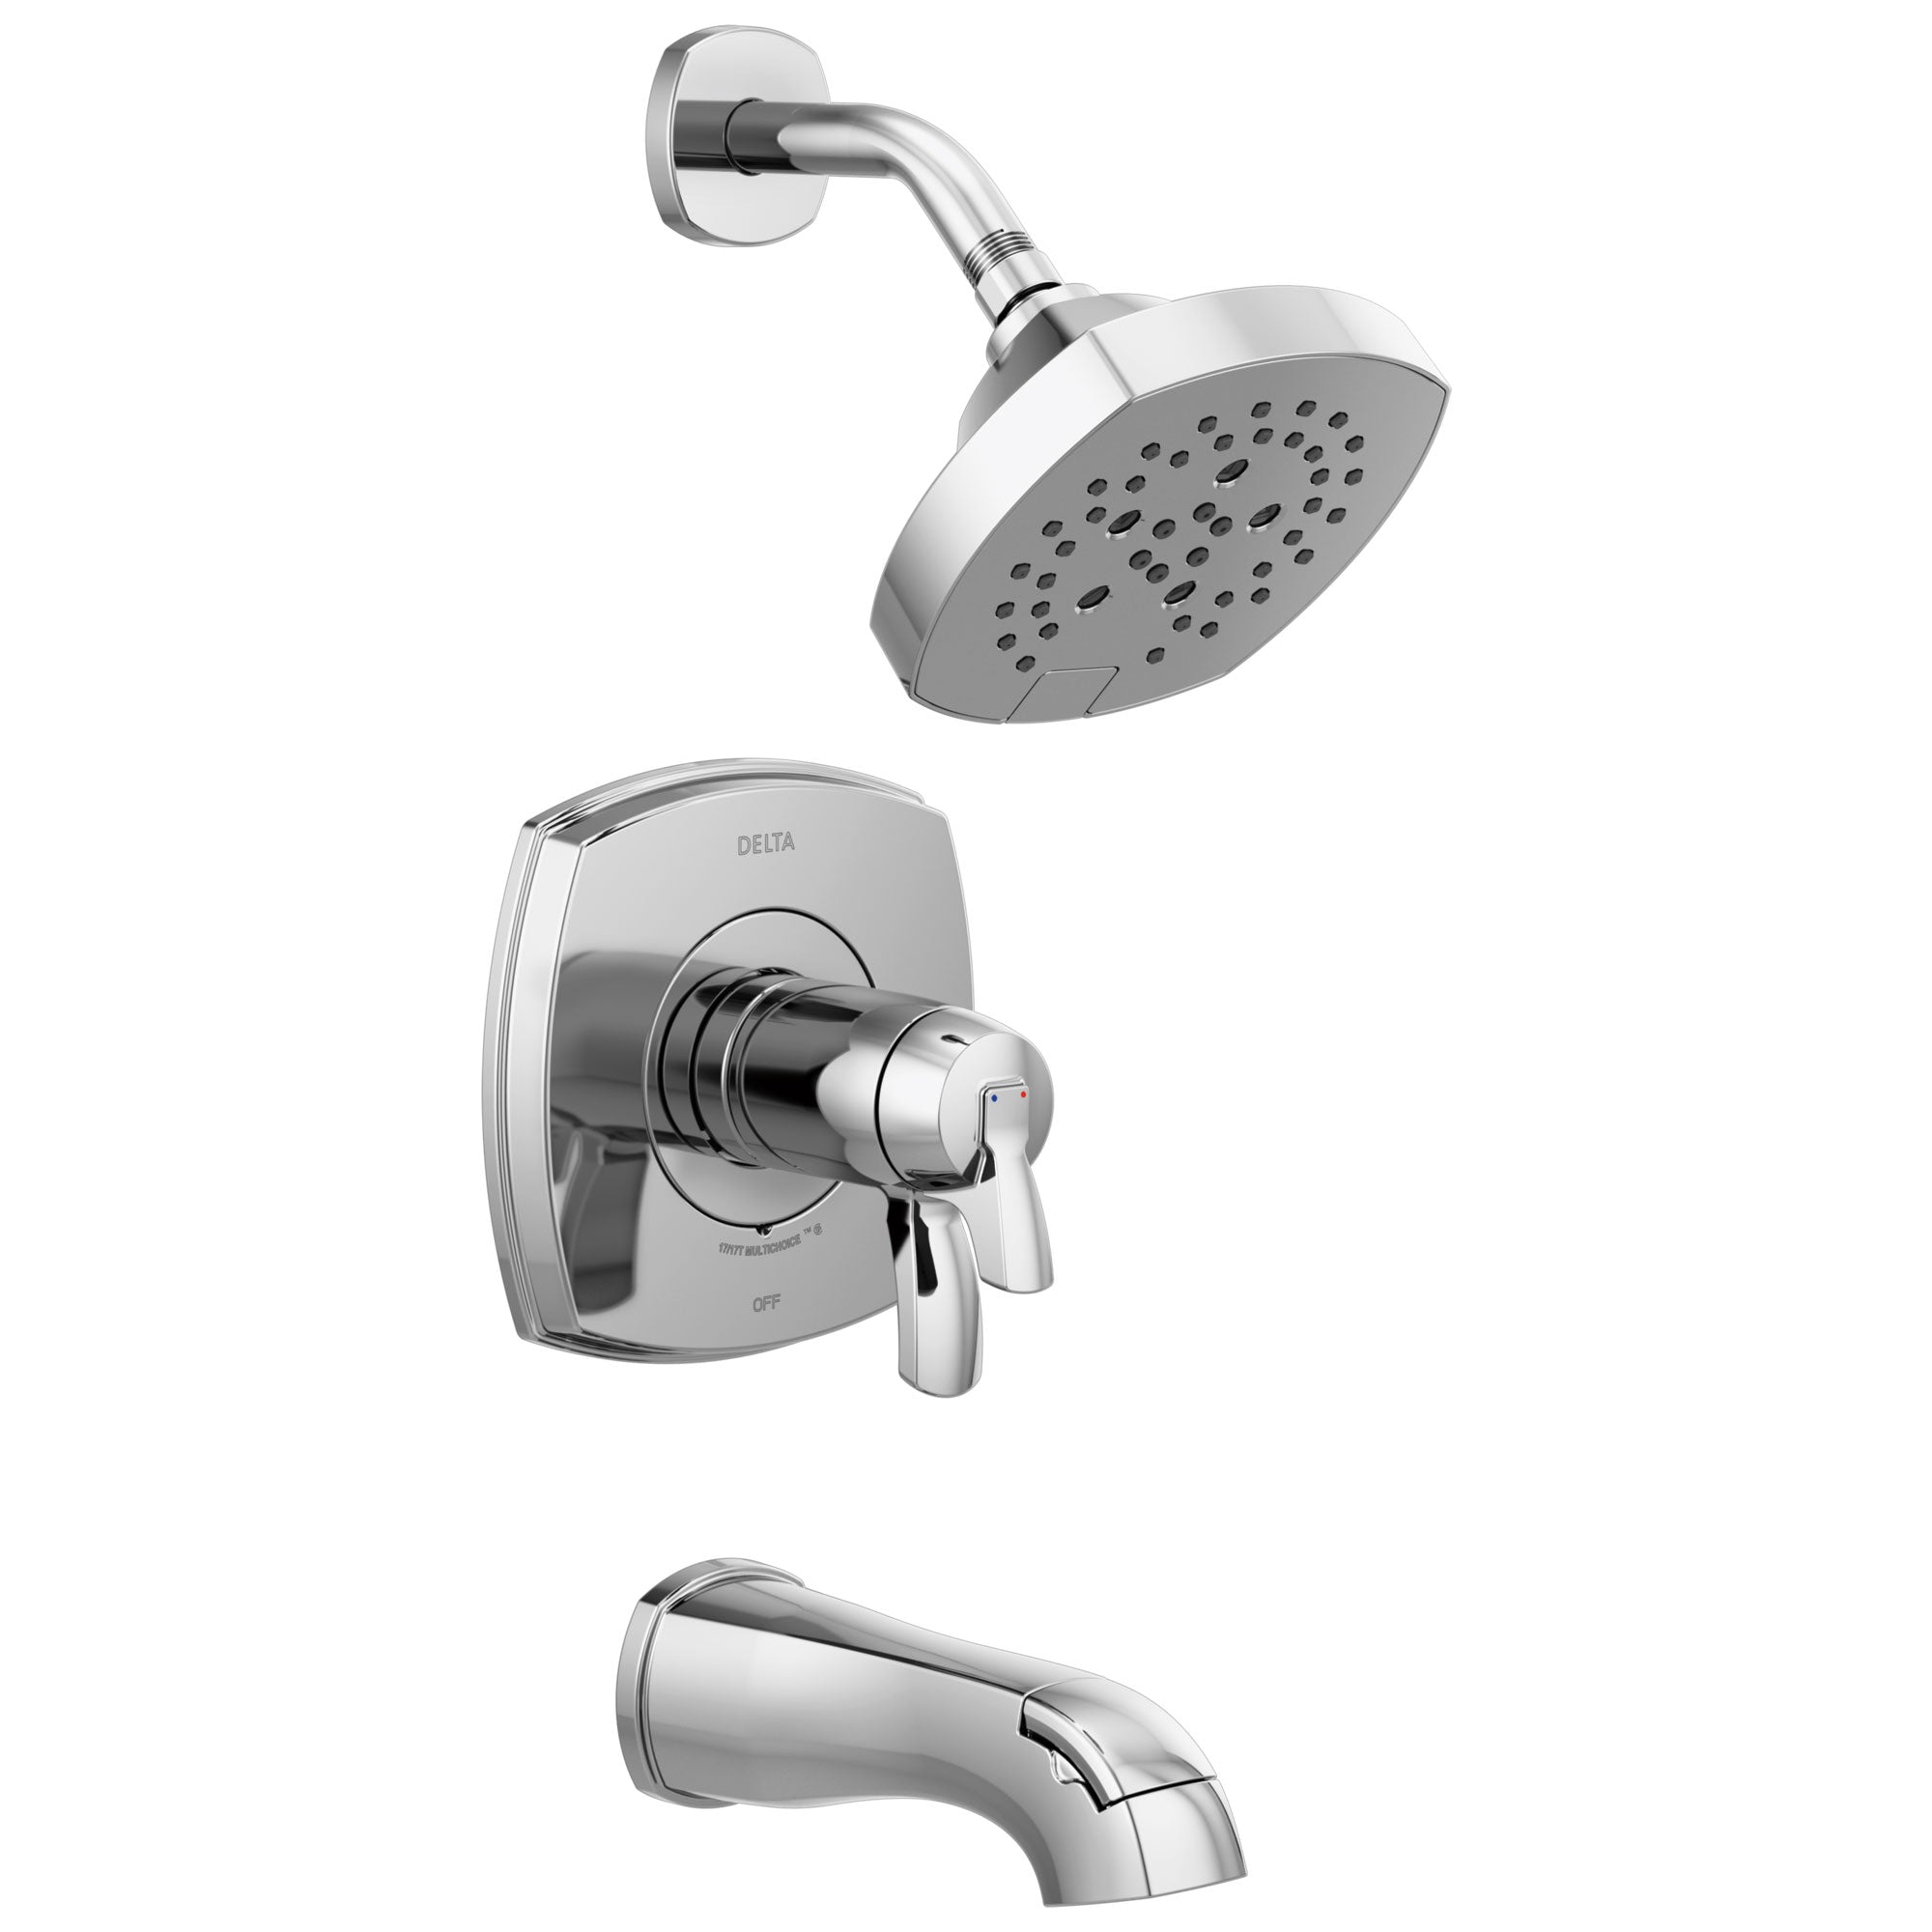 Delta Stryke Chrome Finish 17T Thermostatic Tub and Shower Faucet Combination Includes Handles, Cartridge, and Valve without Stops D3233V